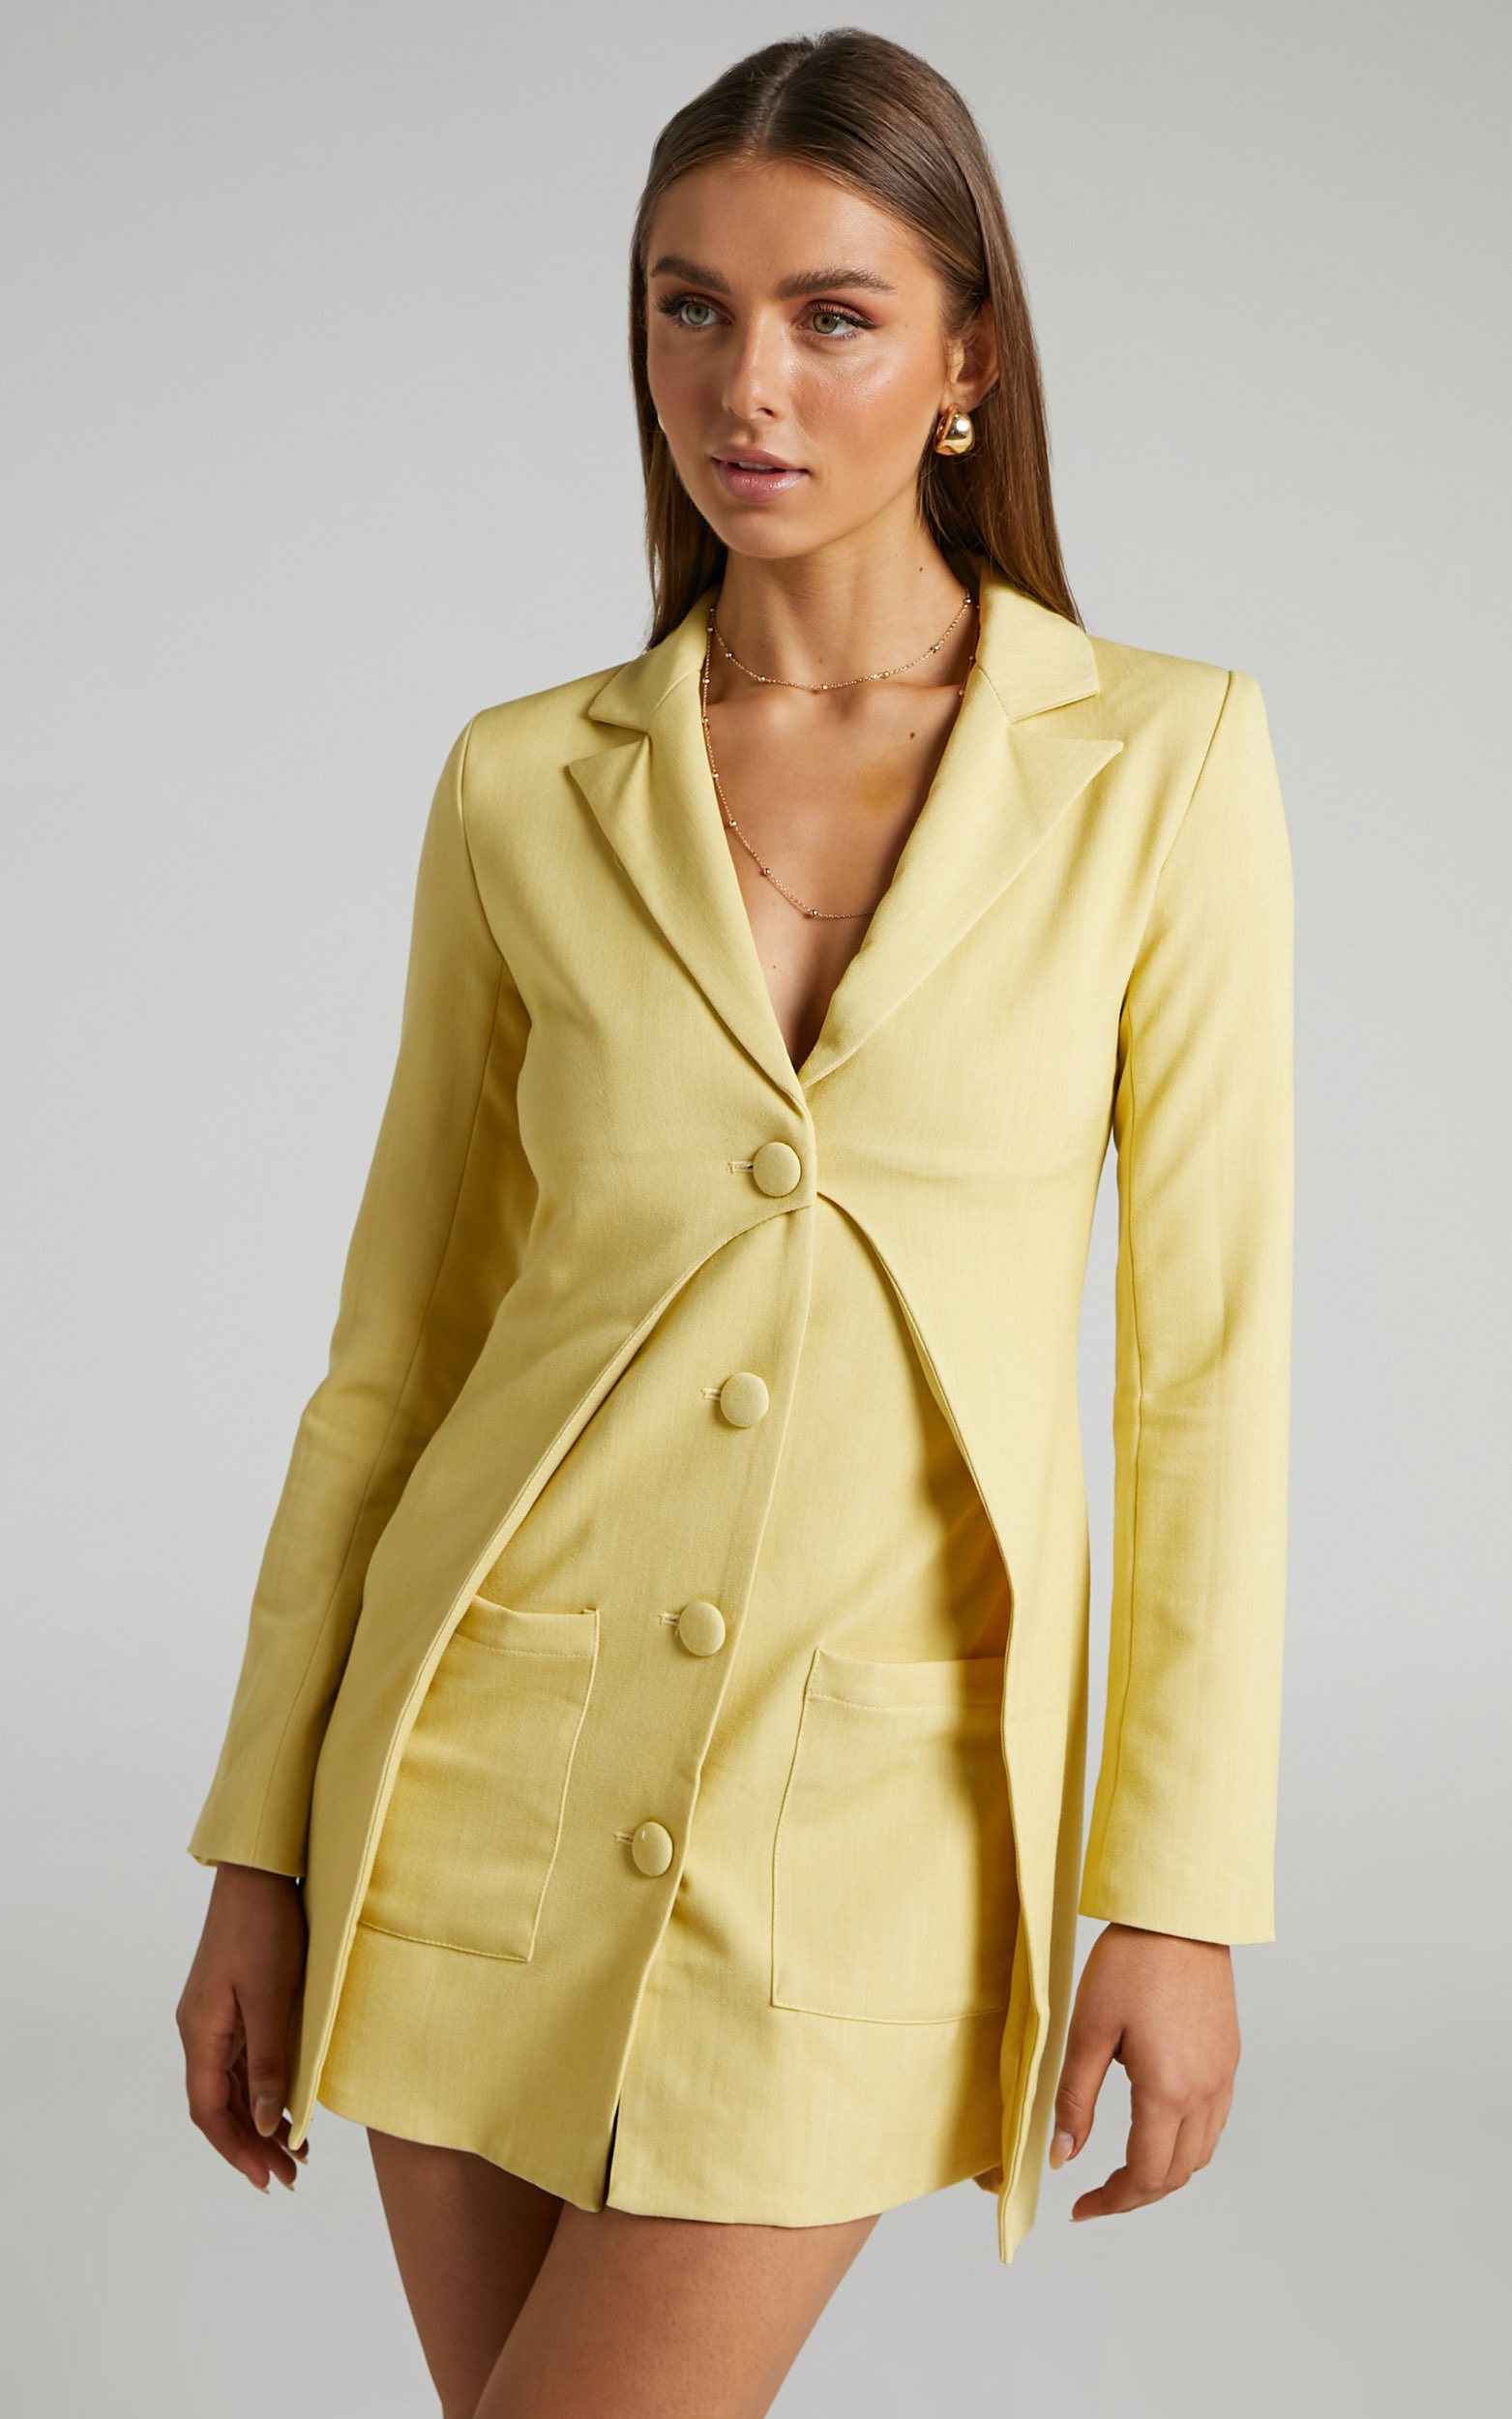 4th & Reckless - Ruth Blazer in Yellow - L, YEL1, hi-res image number null